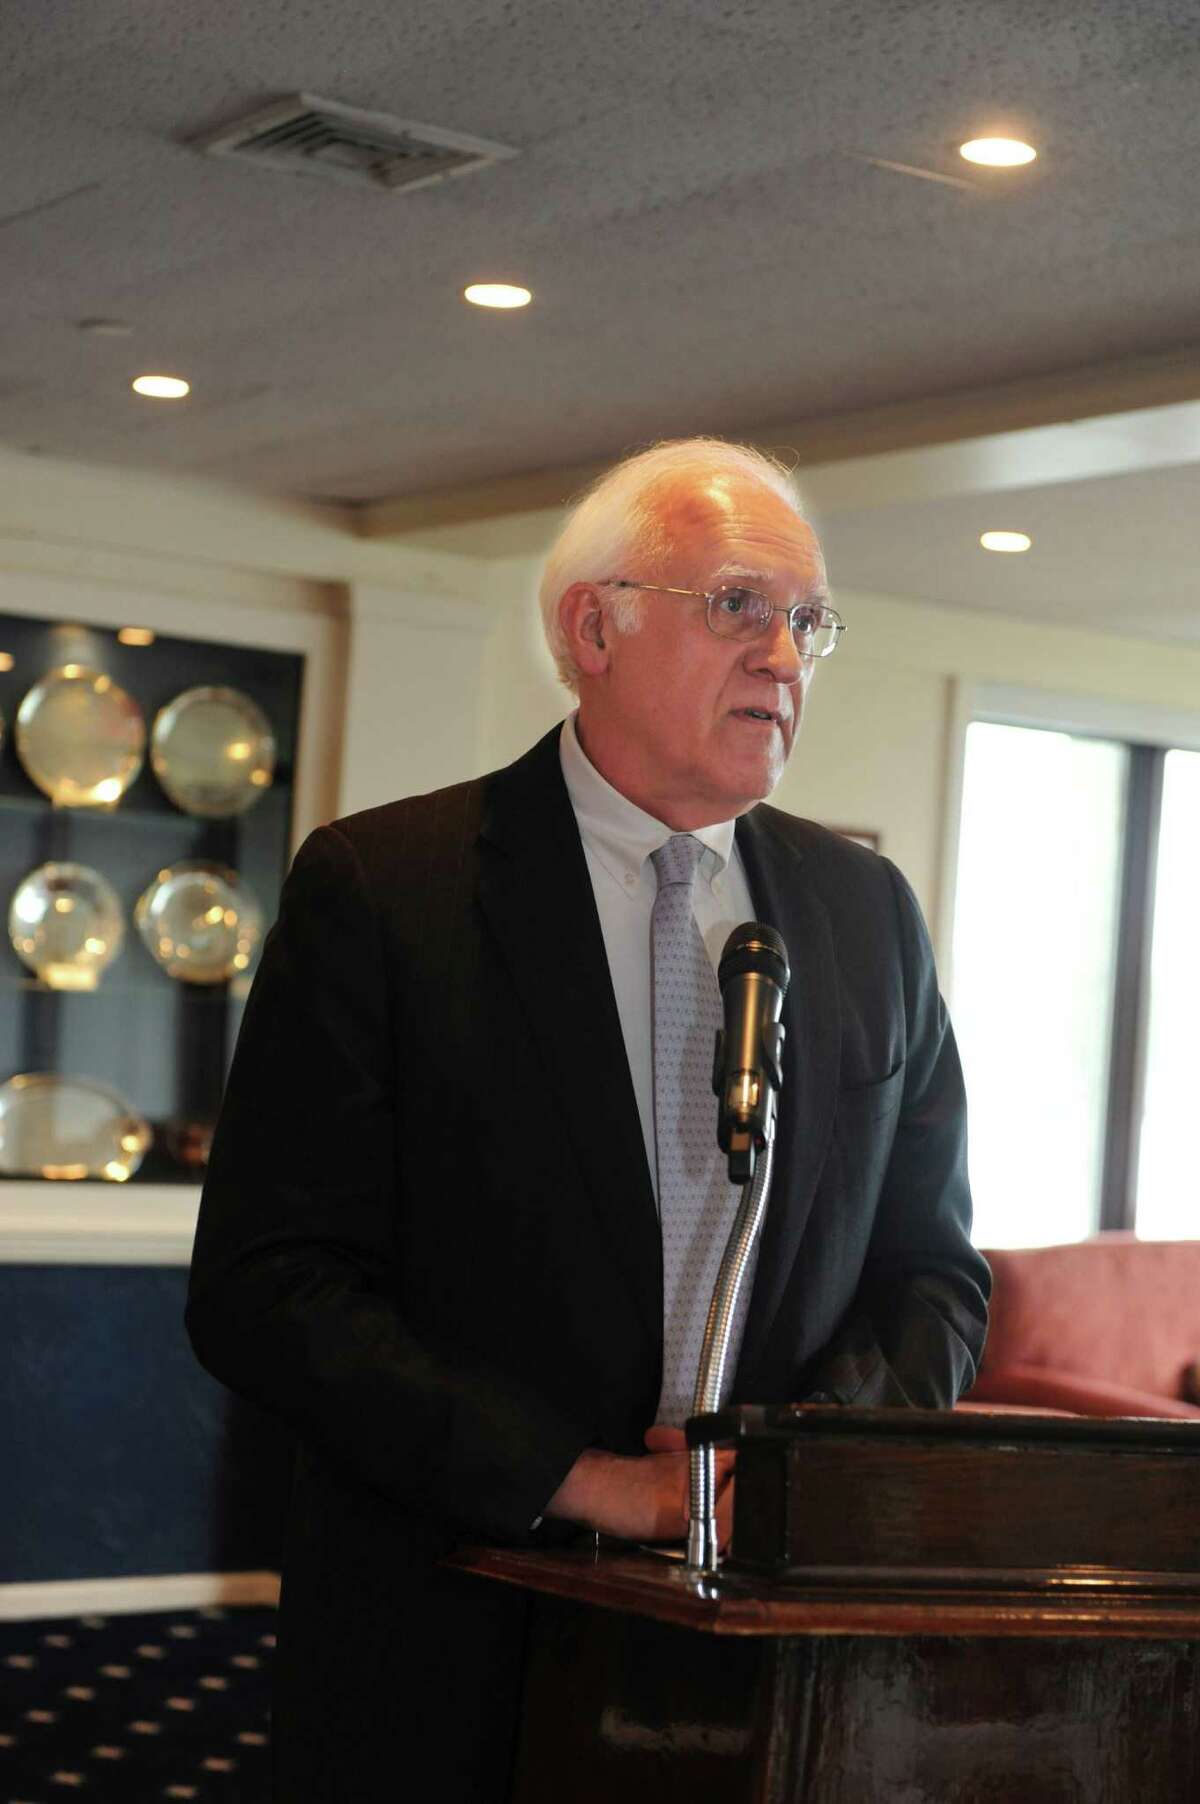 Sam Deibler, the director of the Greenwich Commission of Aging, speaks after the commission was given the 2012 Liberty Bell Award by the Greenwich Bar Association during the association's annual Law Day luncheon at the Indian Harbor Yacht Club Tuesday, May 15, 2012.